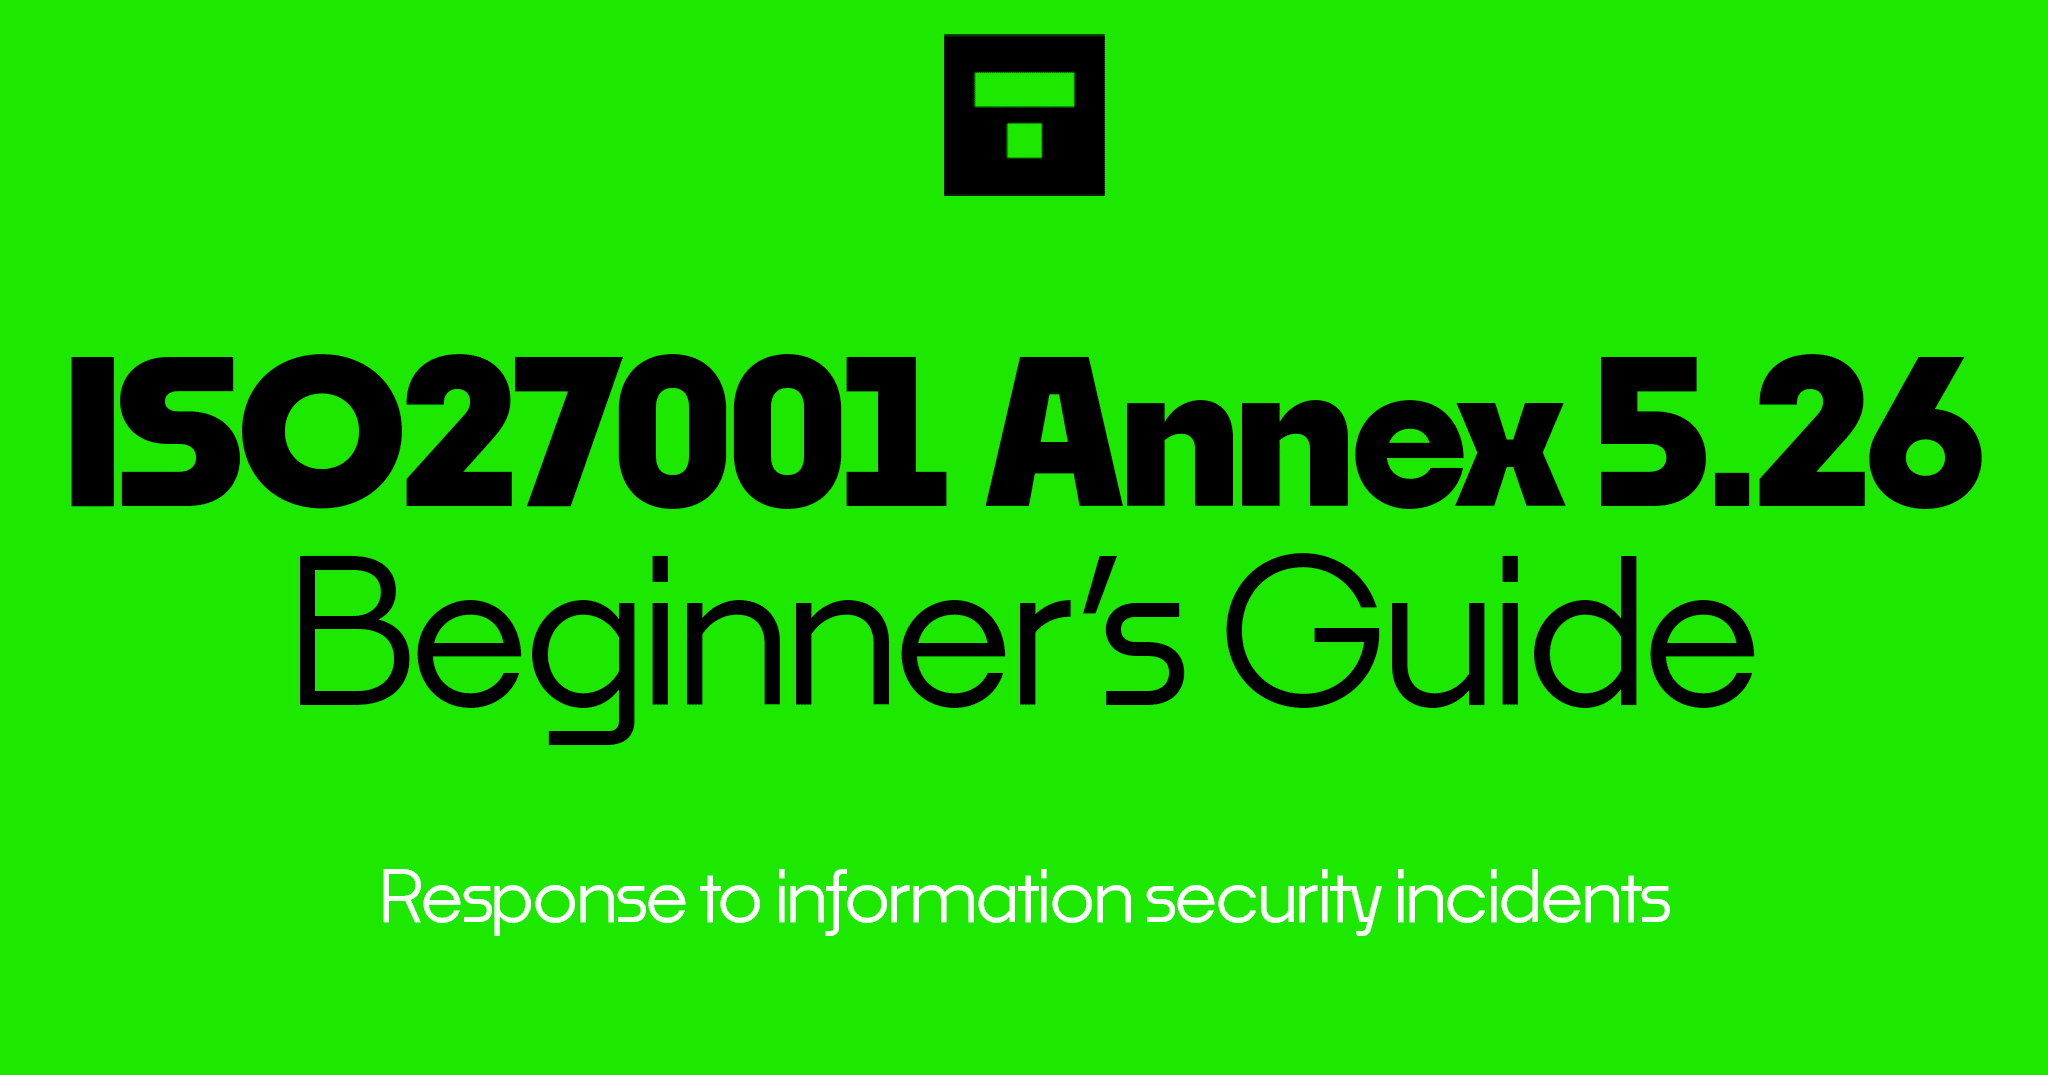 How To Implement ISO 27001 Annex A 5.26 Response To Information Security Incidents